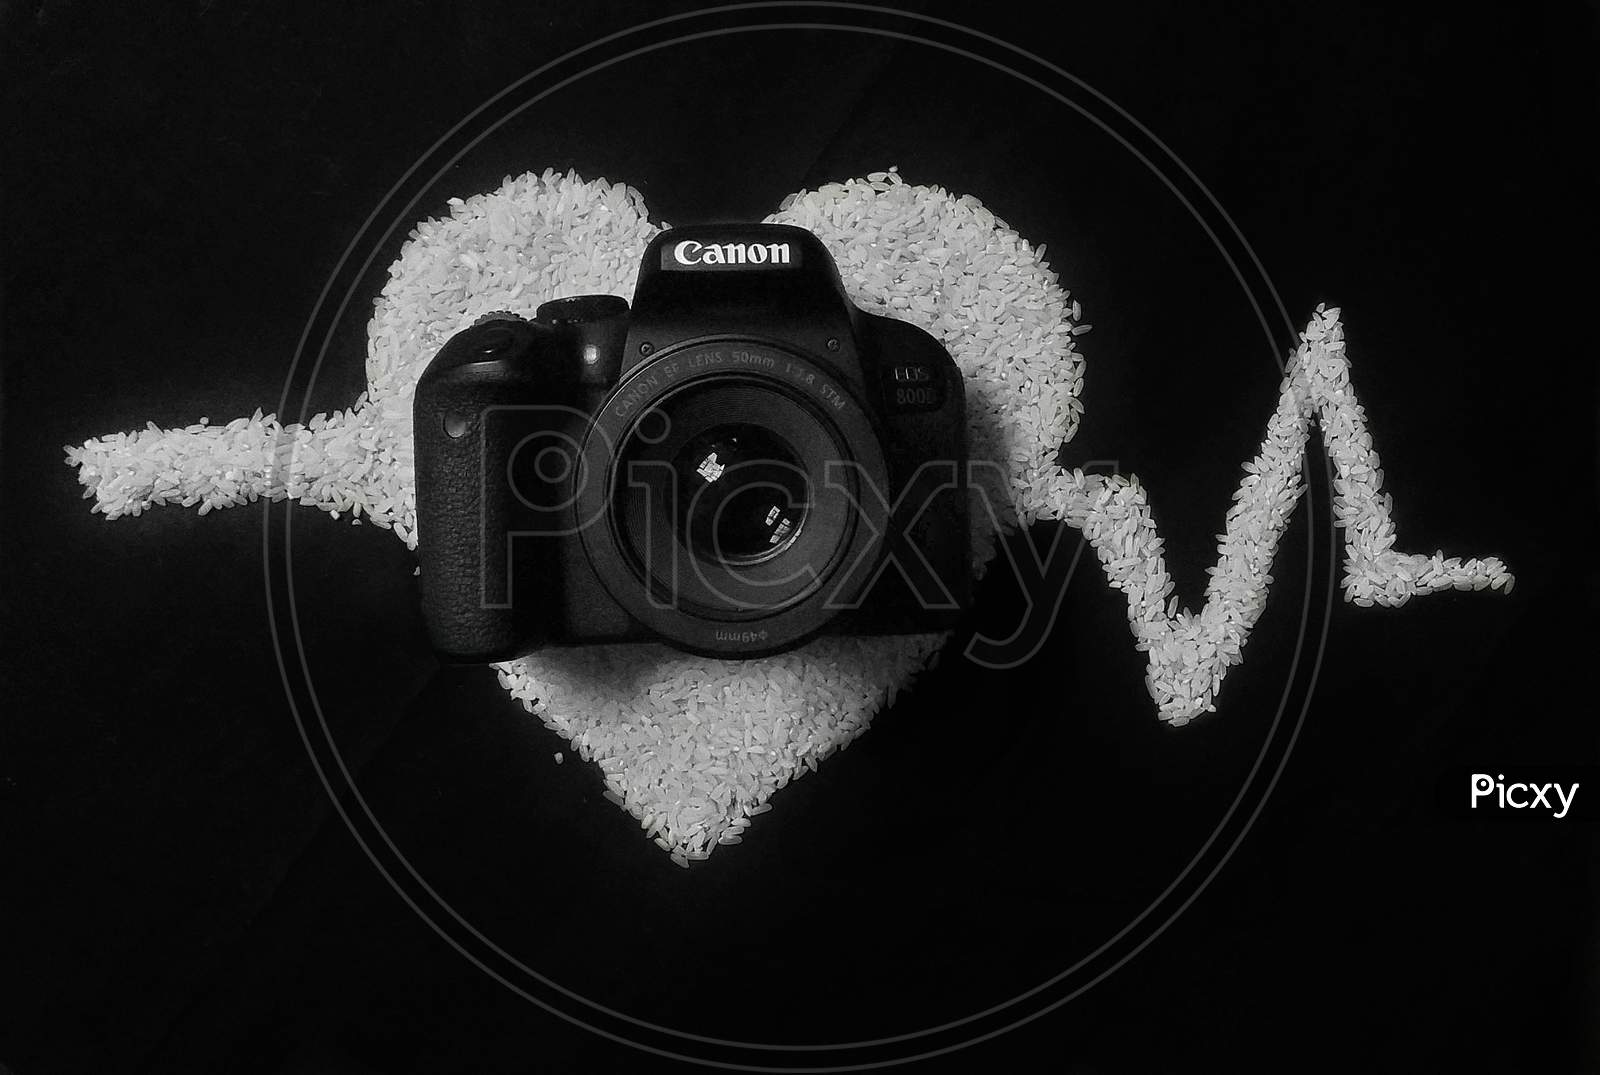 Using rice and camera photography